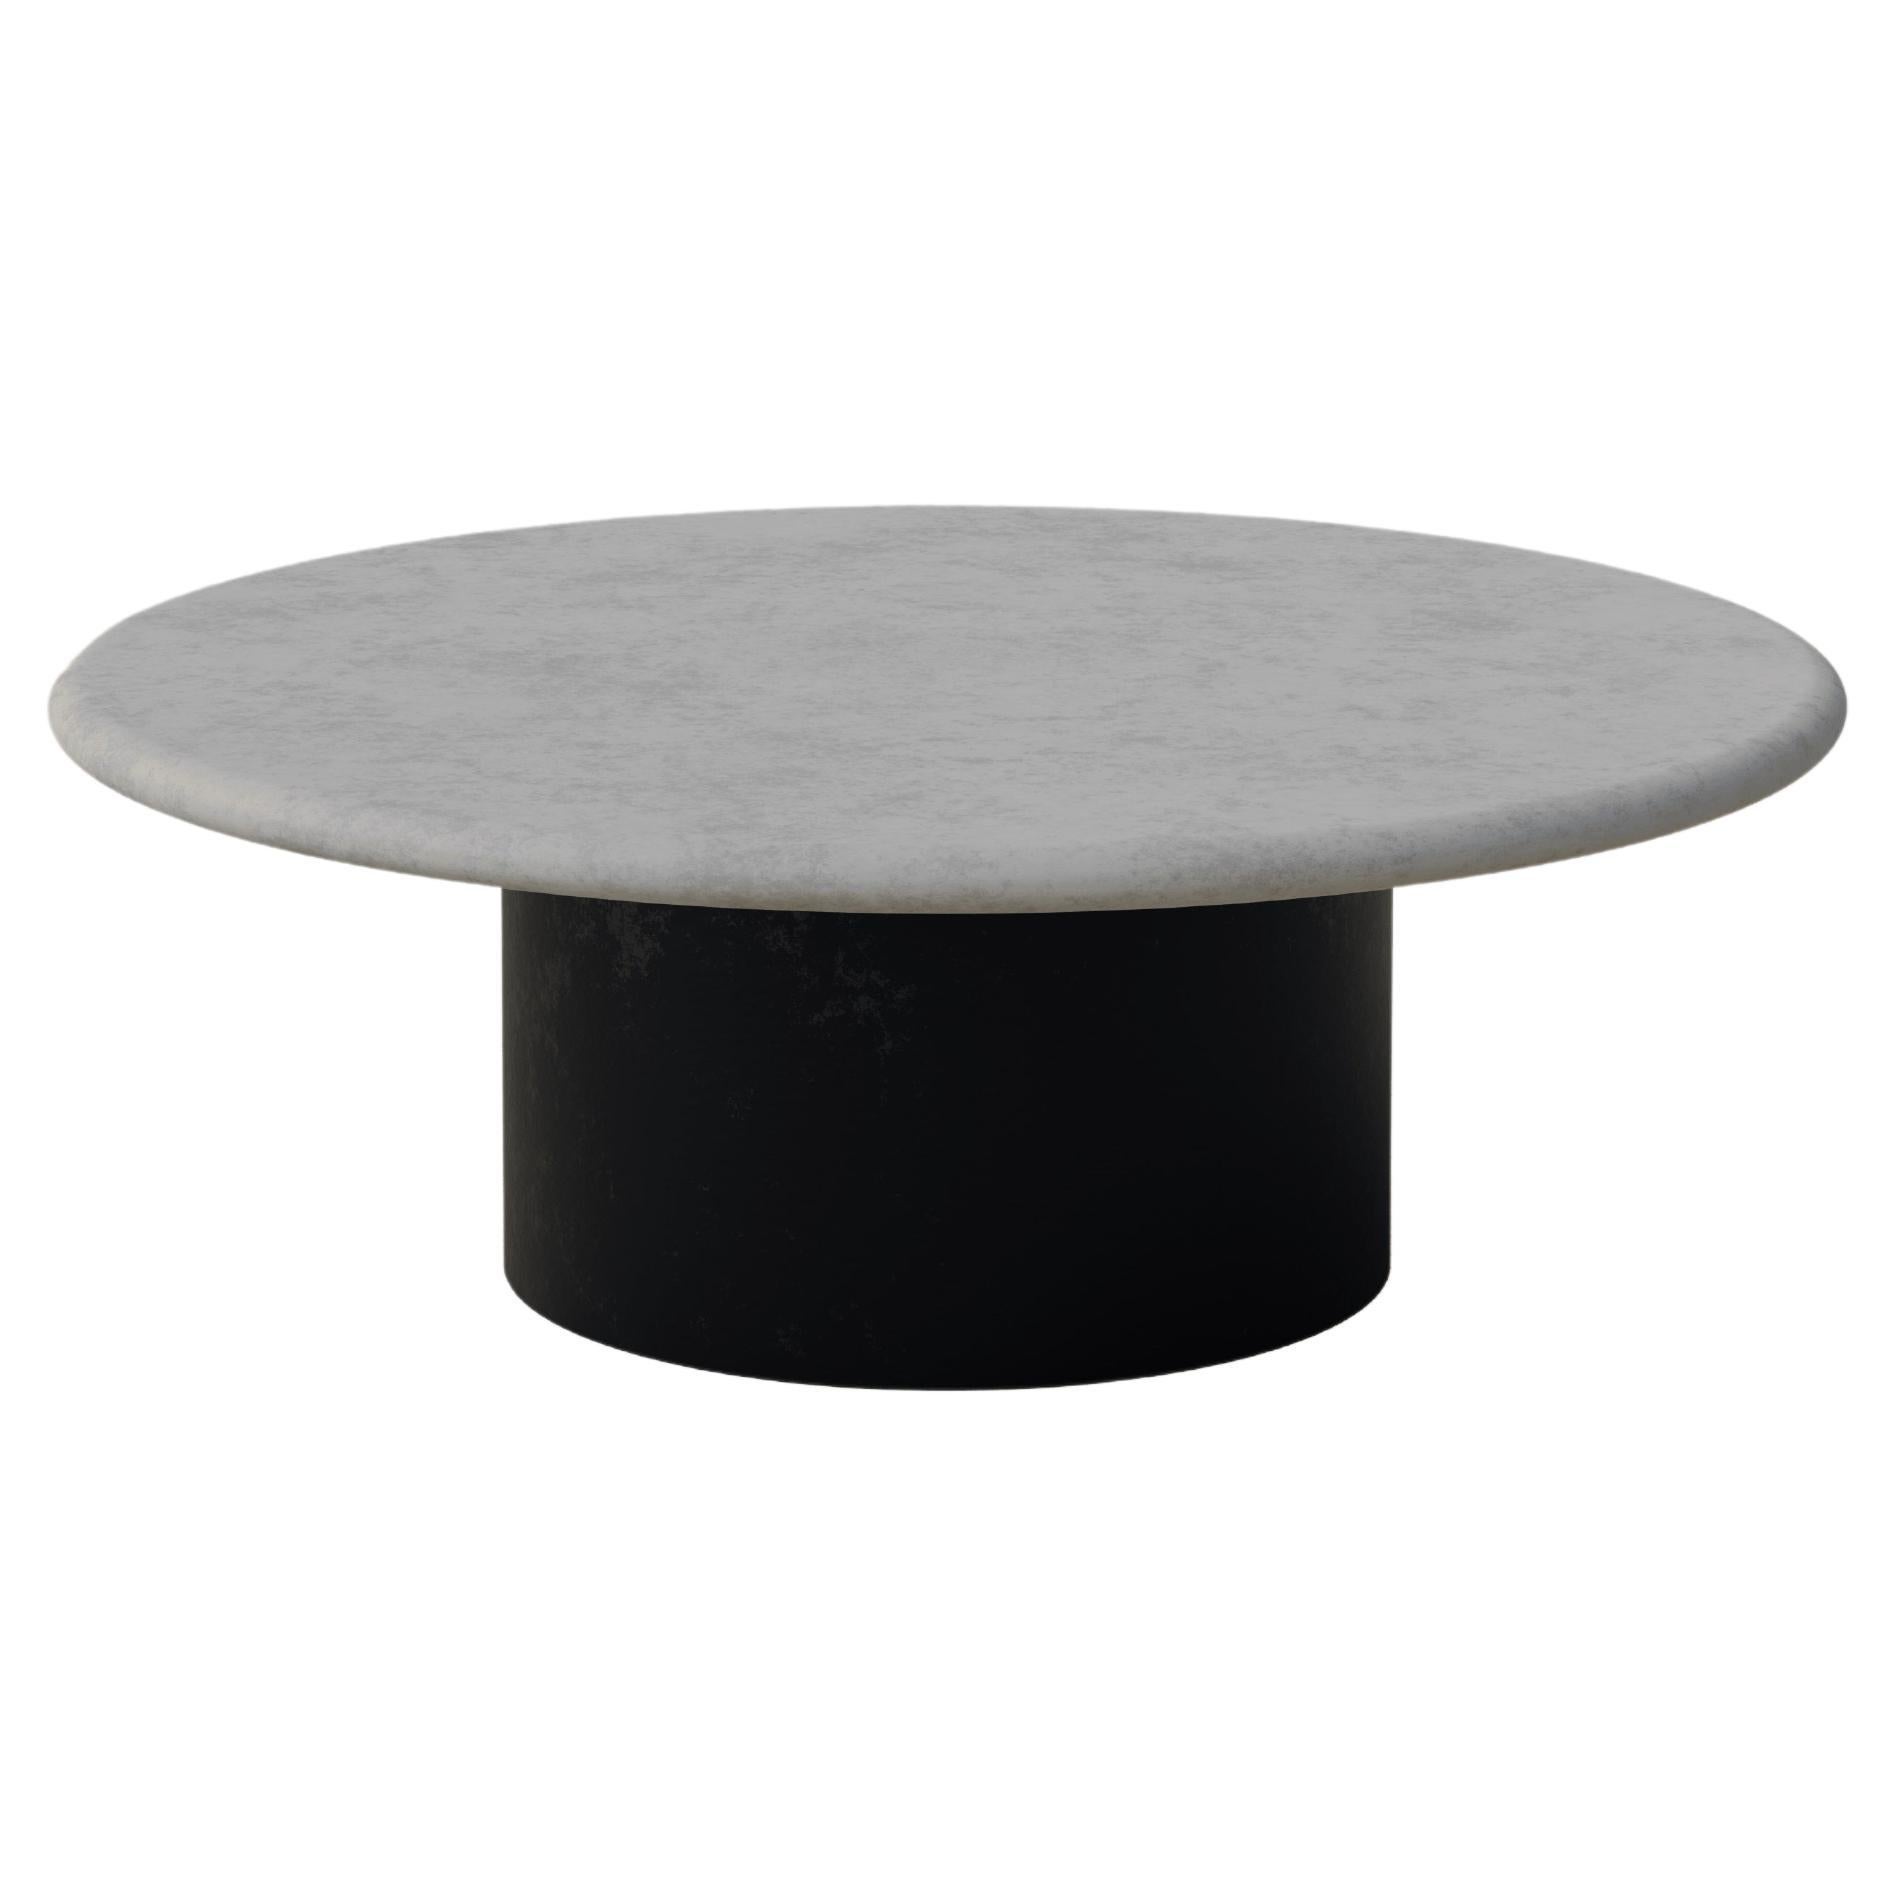 Raindrop Coffee Table, 800, Microcrete / Patinated For Sale